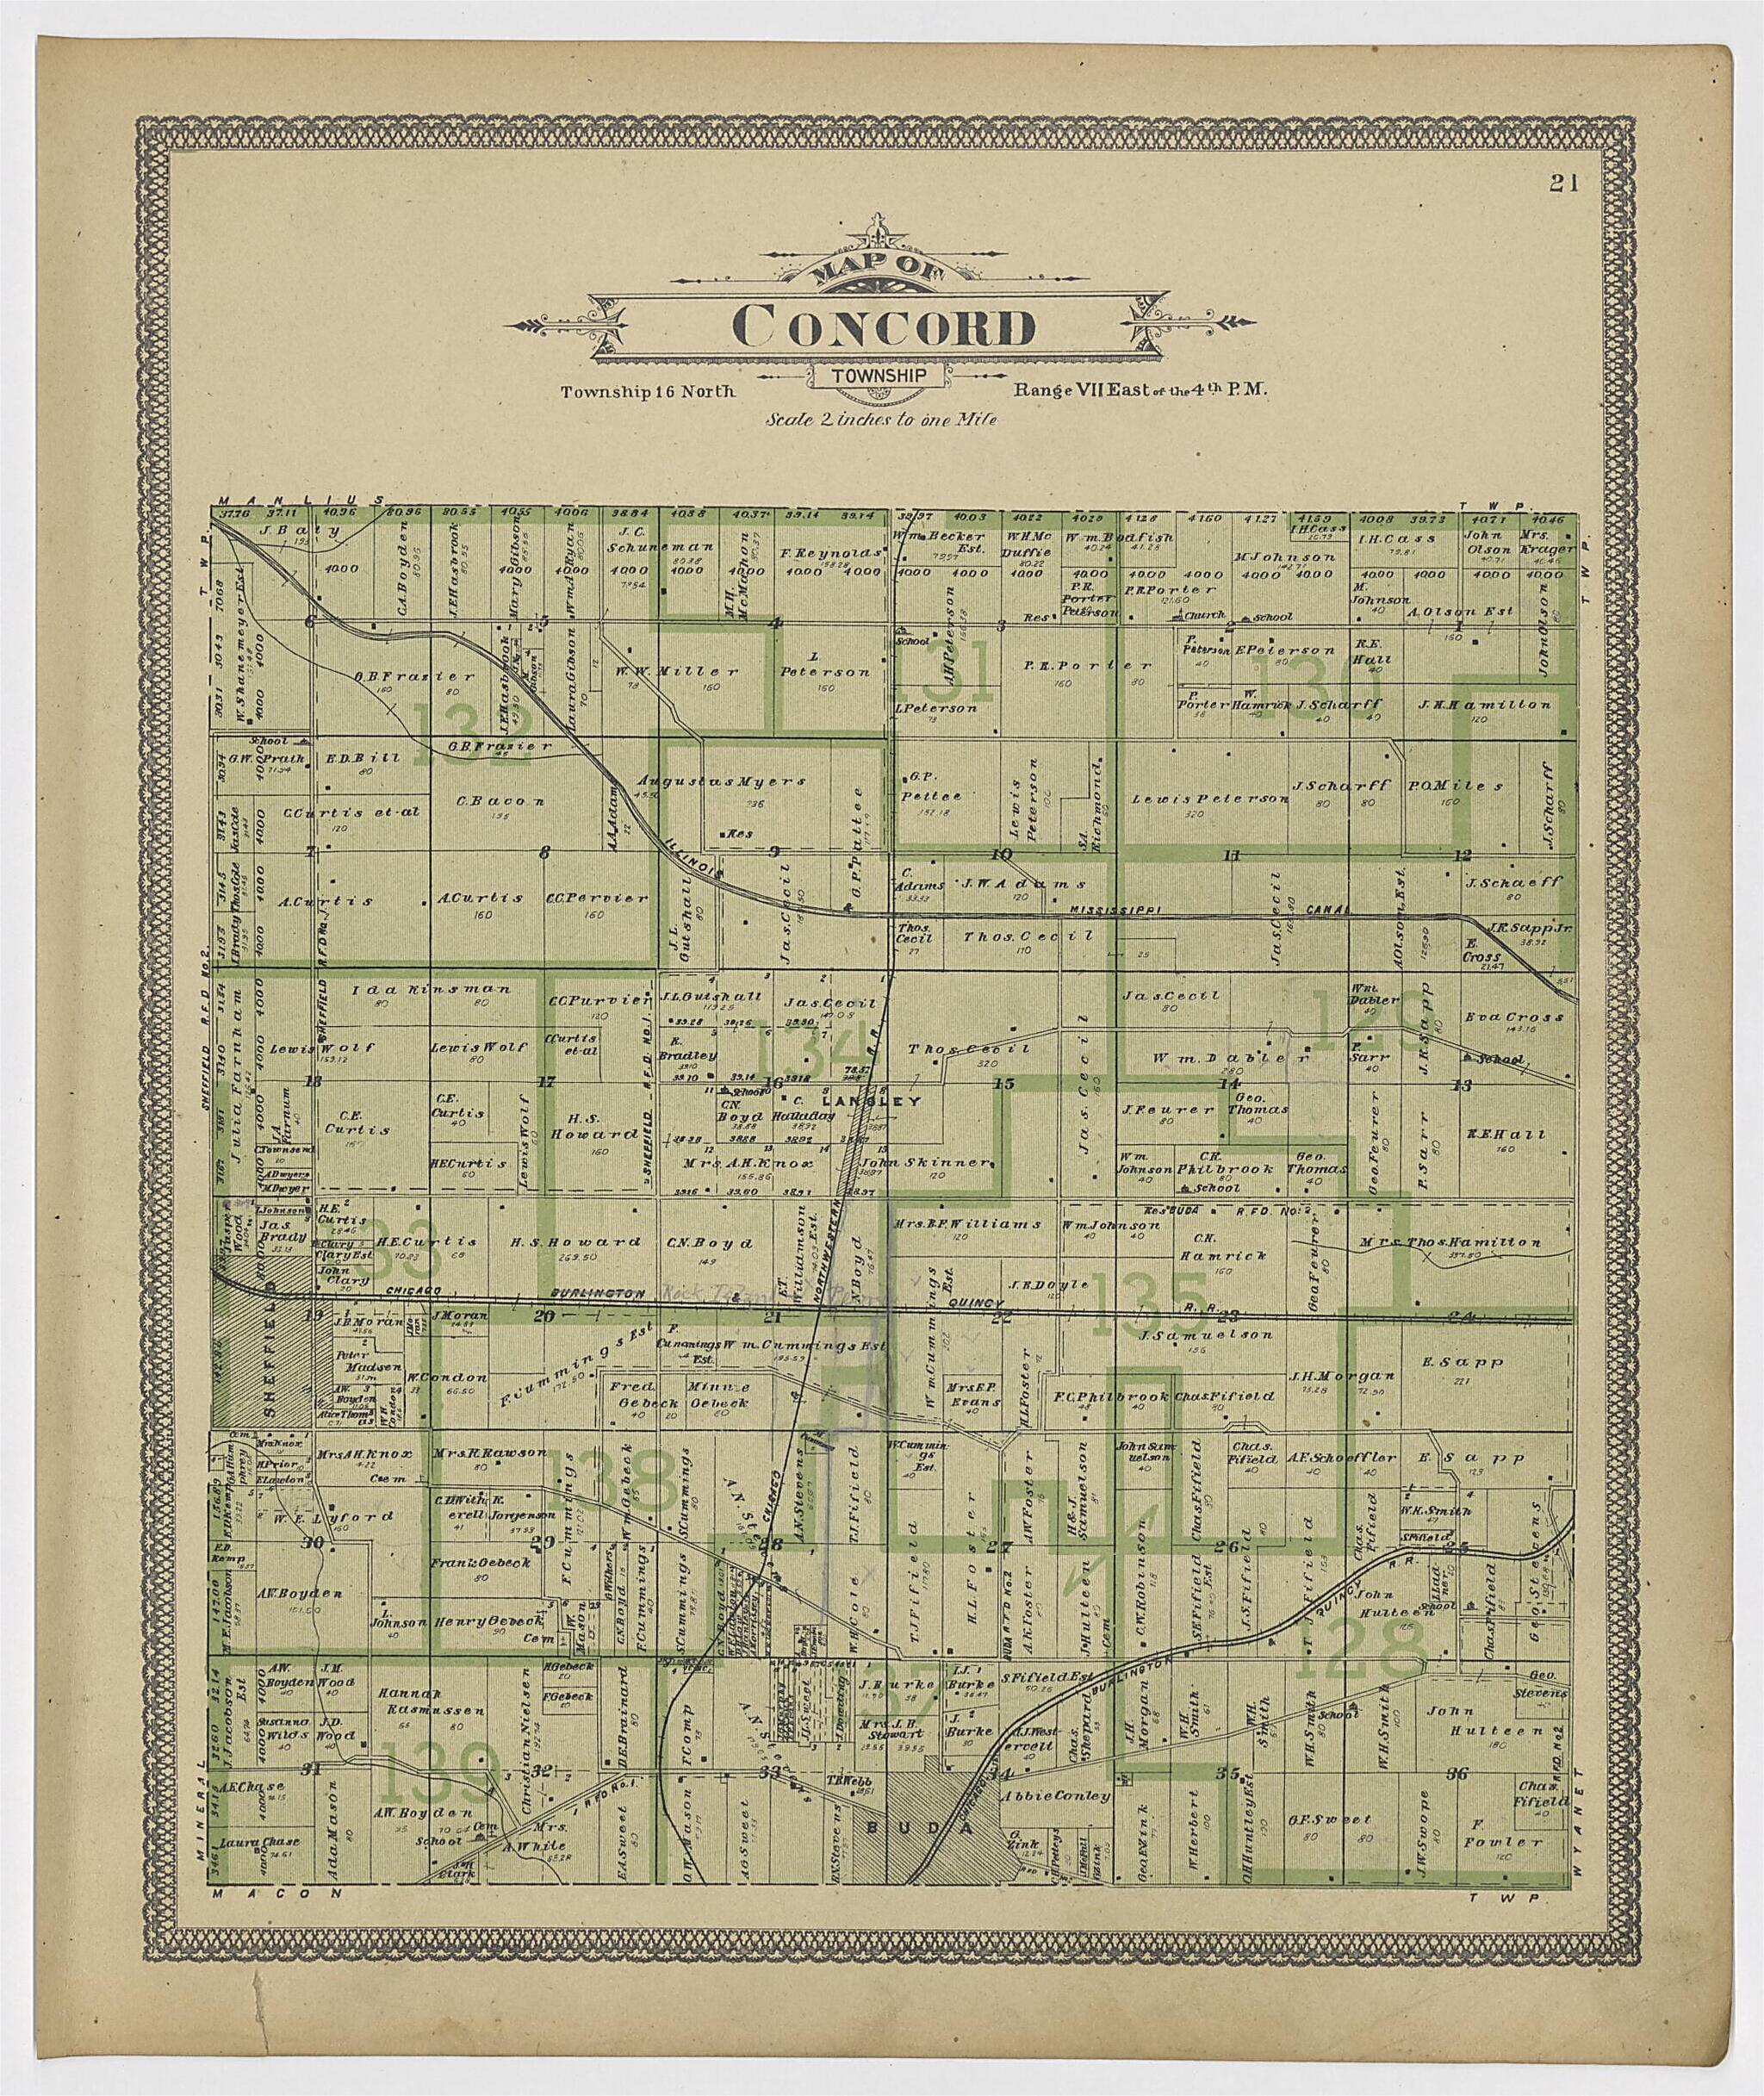 This old map of Image 12 of 20th Century Atlas of Bureau County, Illinois from Atlas of Bureau County, Illinois from 1905 was created by  Middle-West Publishing Co in 1905